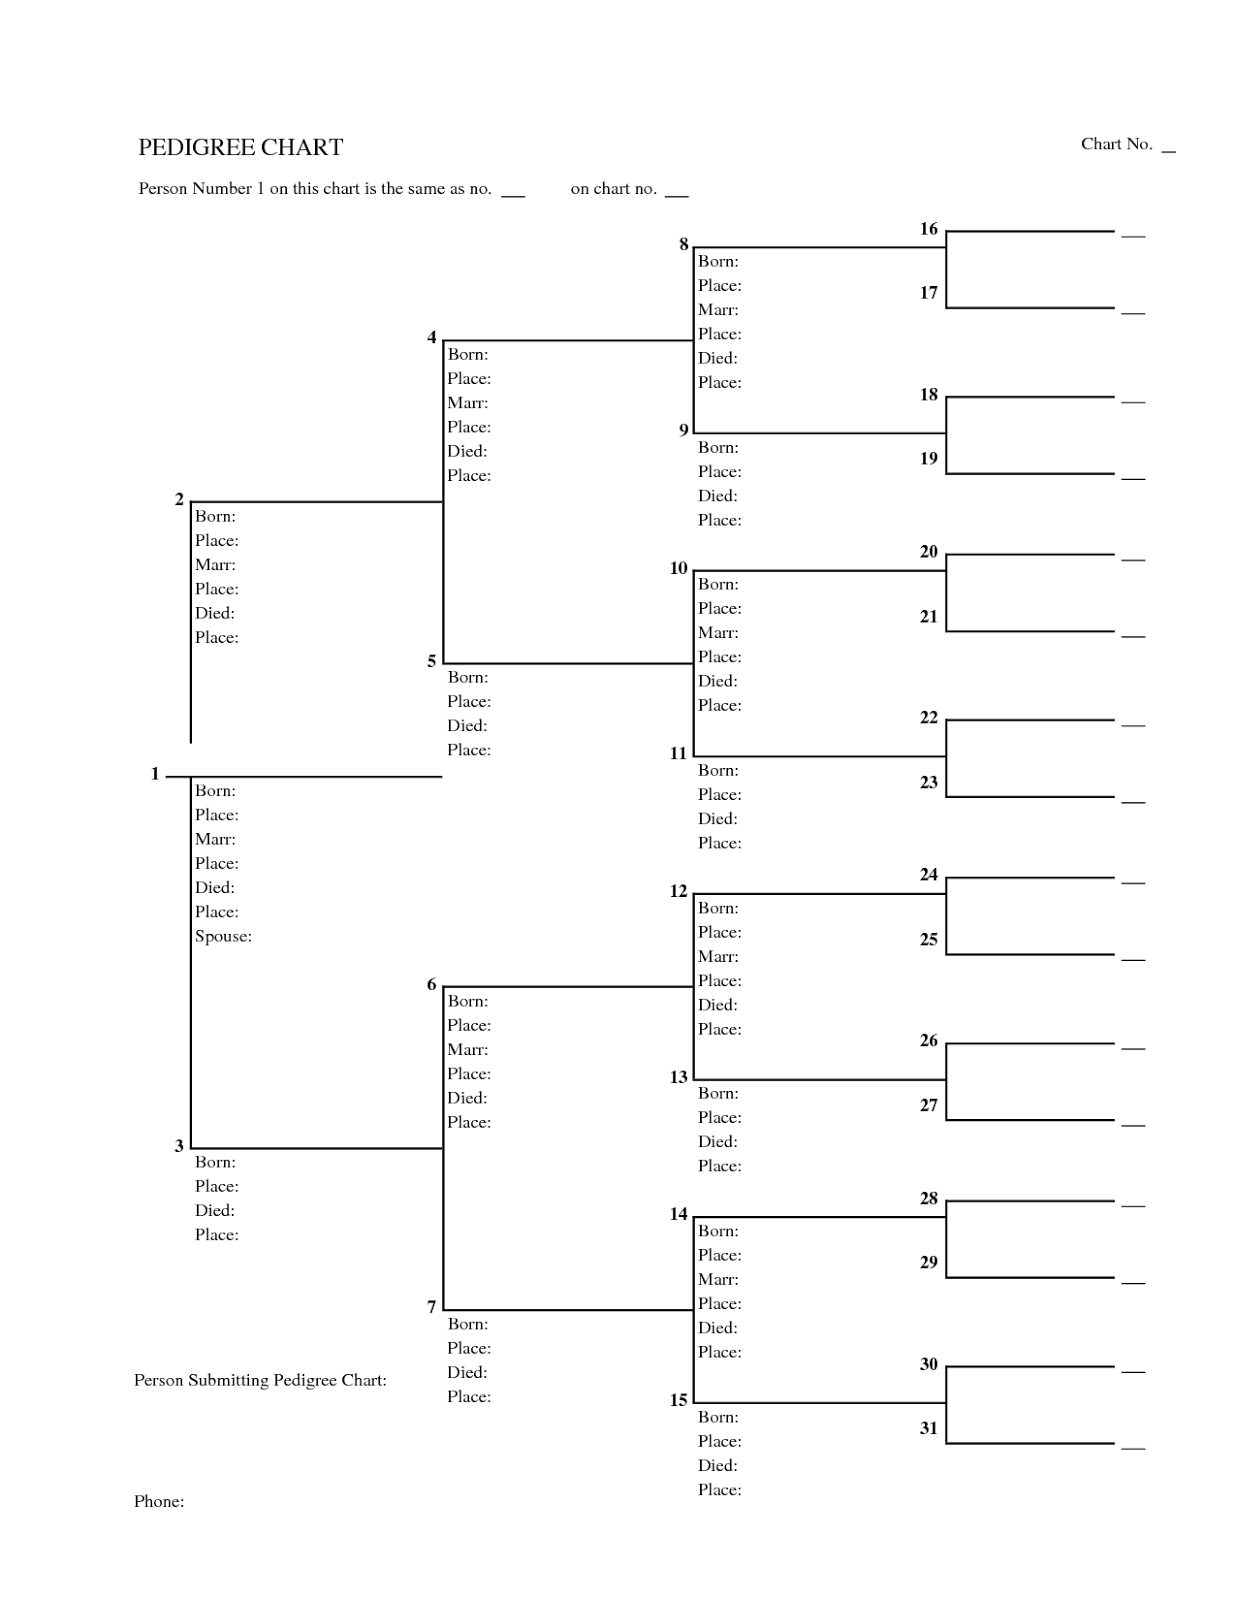 Generation Family Tree Template With Siblings 3 generations, that ...